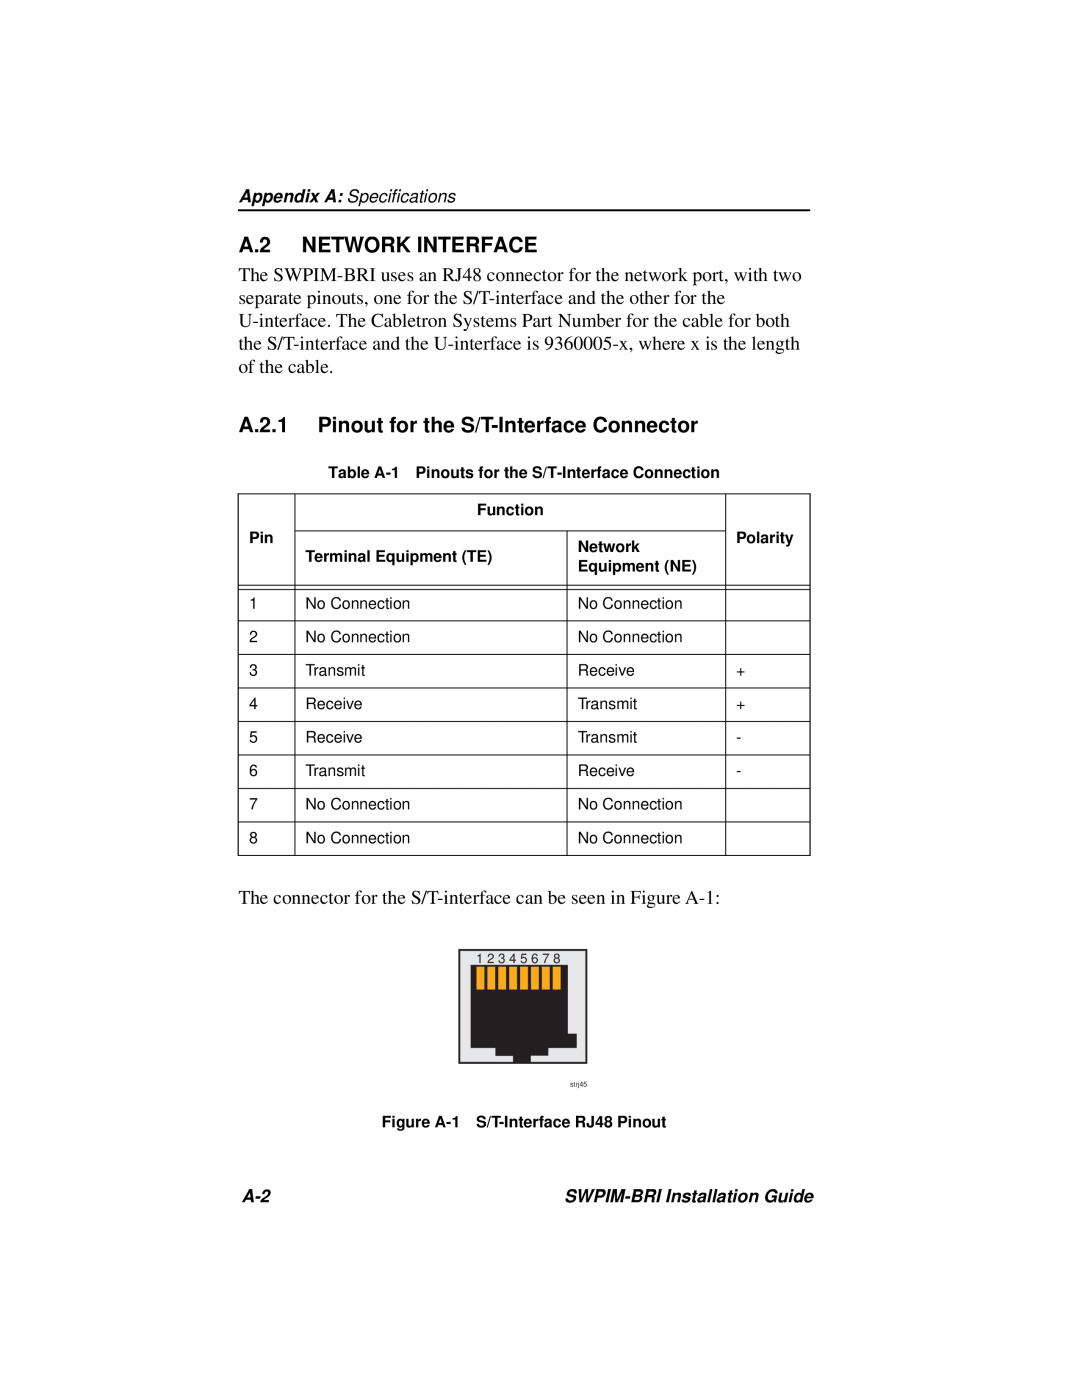 Cabletron Systems SWPIM-BRI manual A.2 NETWORK INTERFACE, A.2.1 Pinout for the S/T-Interface Connector 